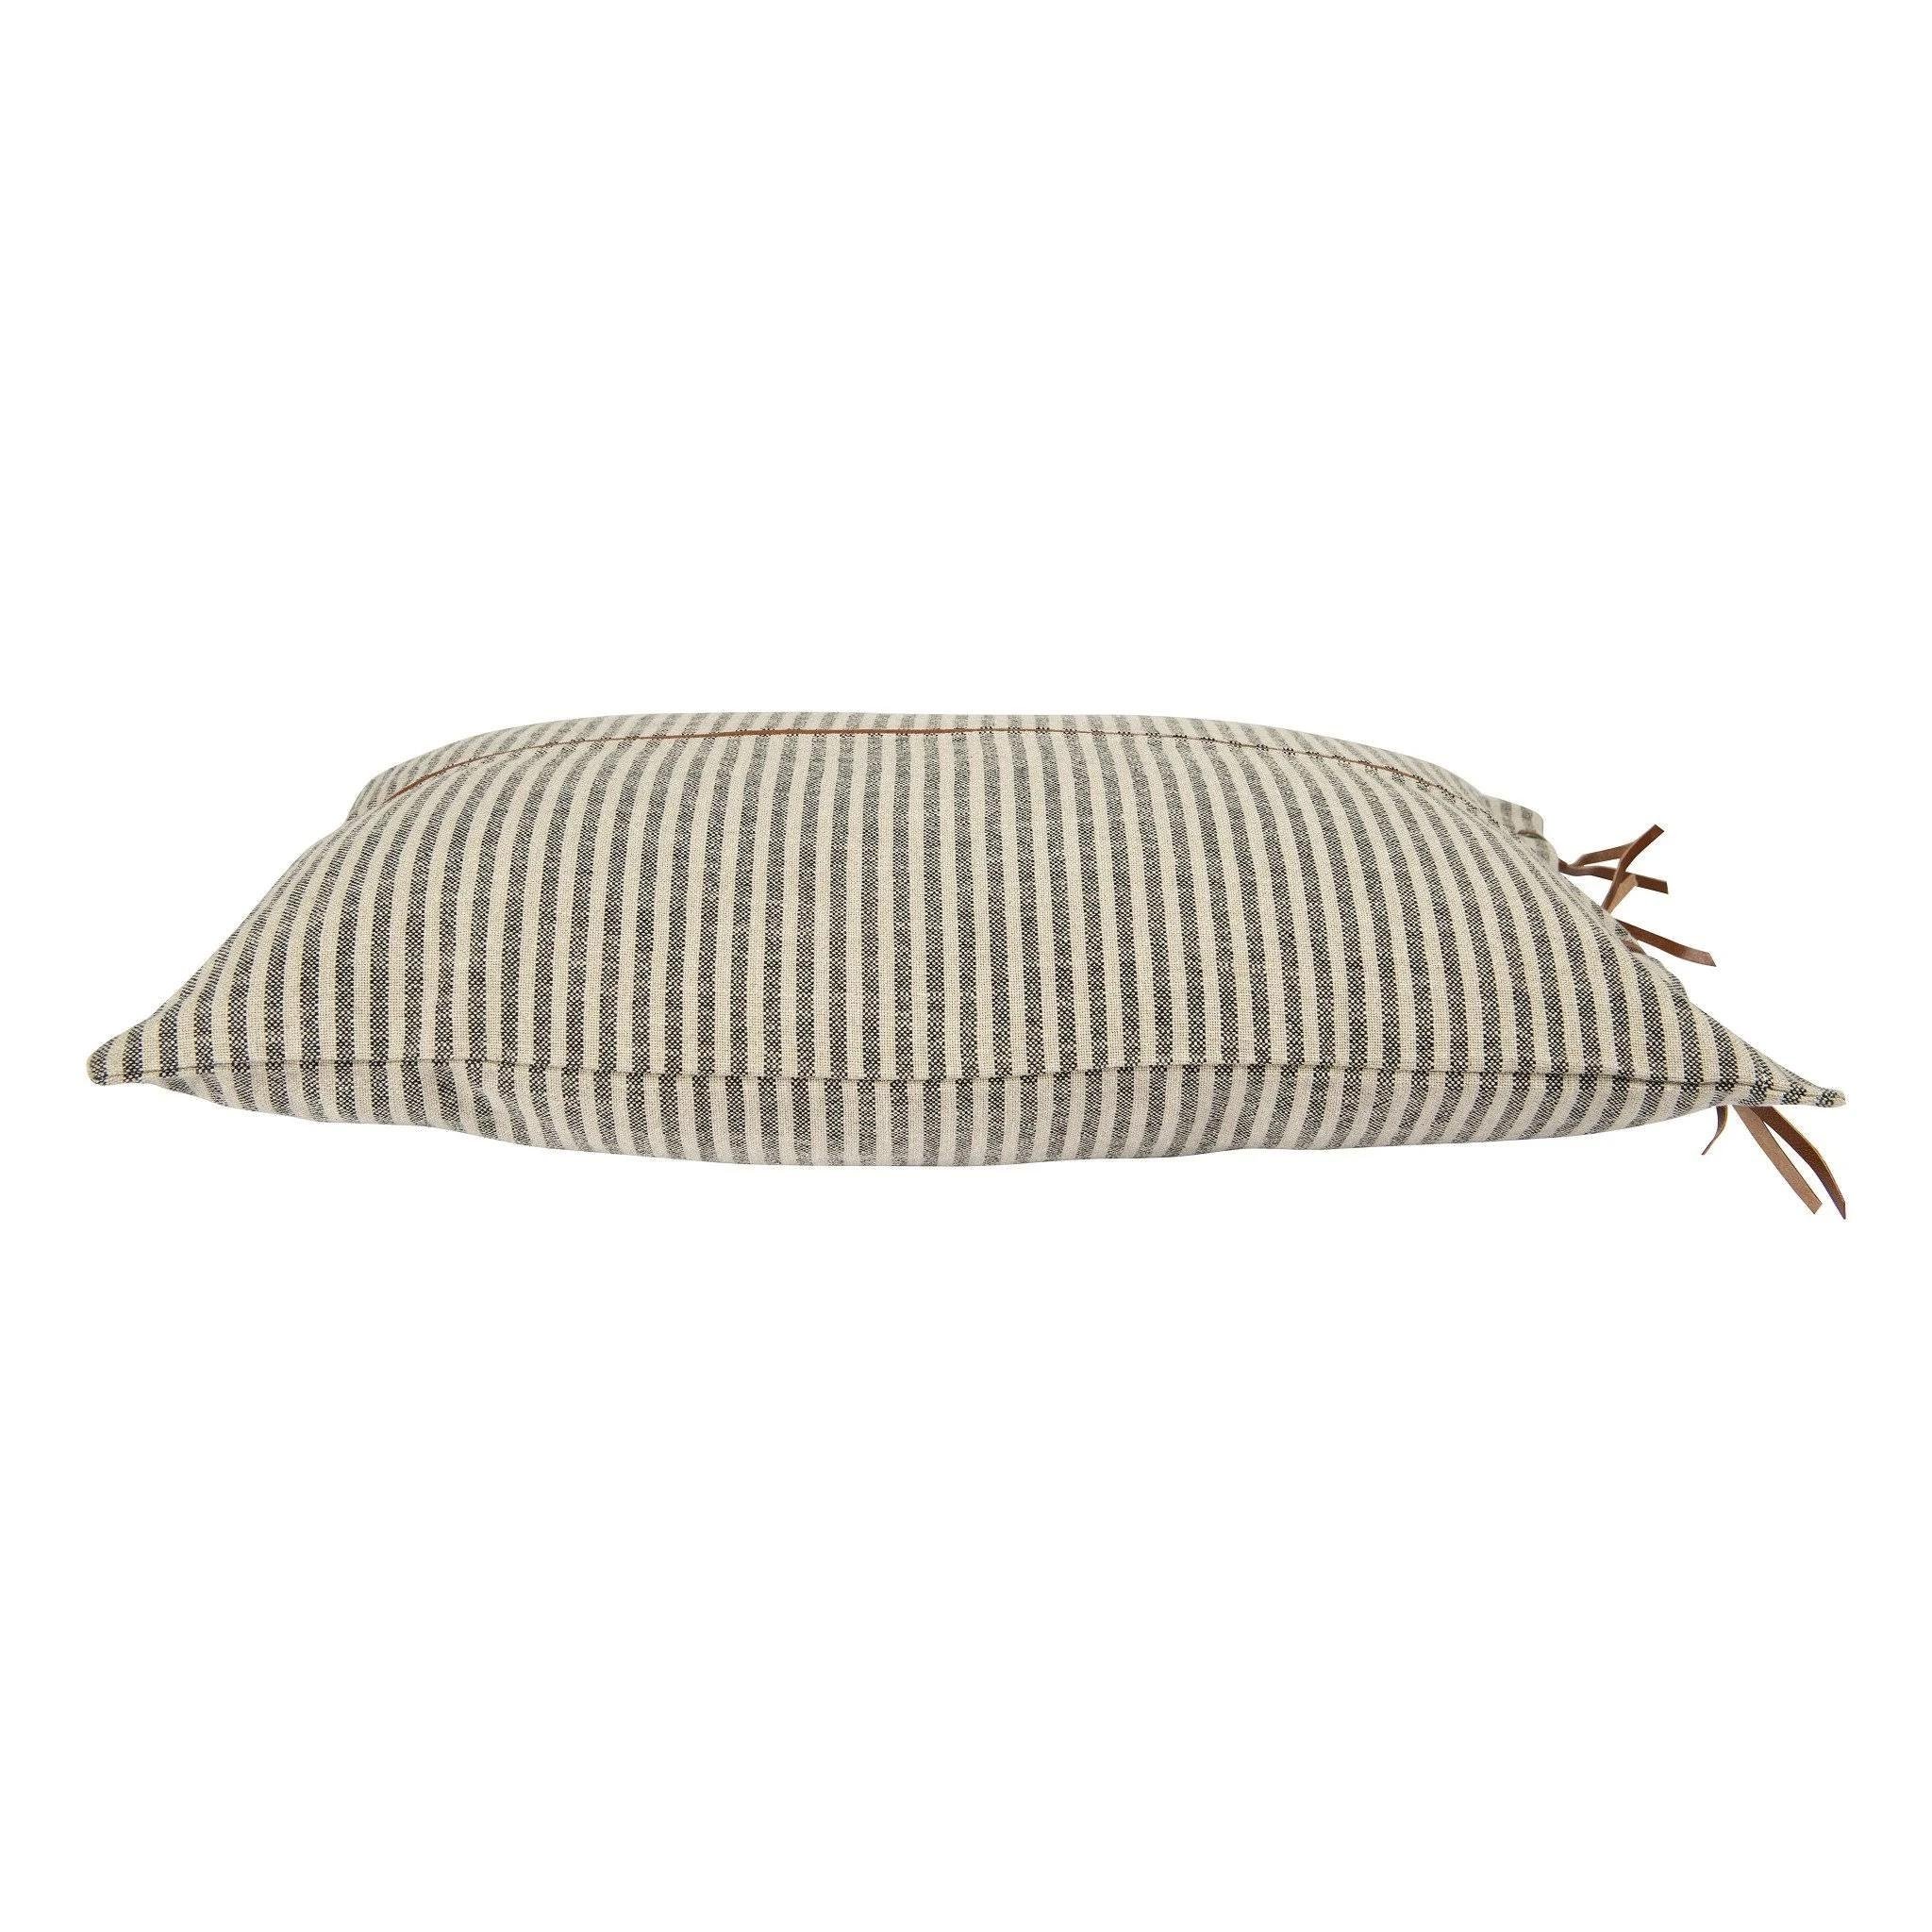 Beige & Black Striped Cotton Ticking Lumbar Pillow with Leather Trim - Image 3